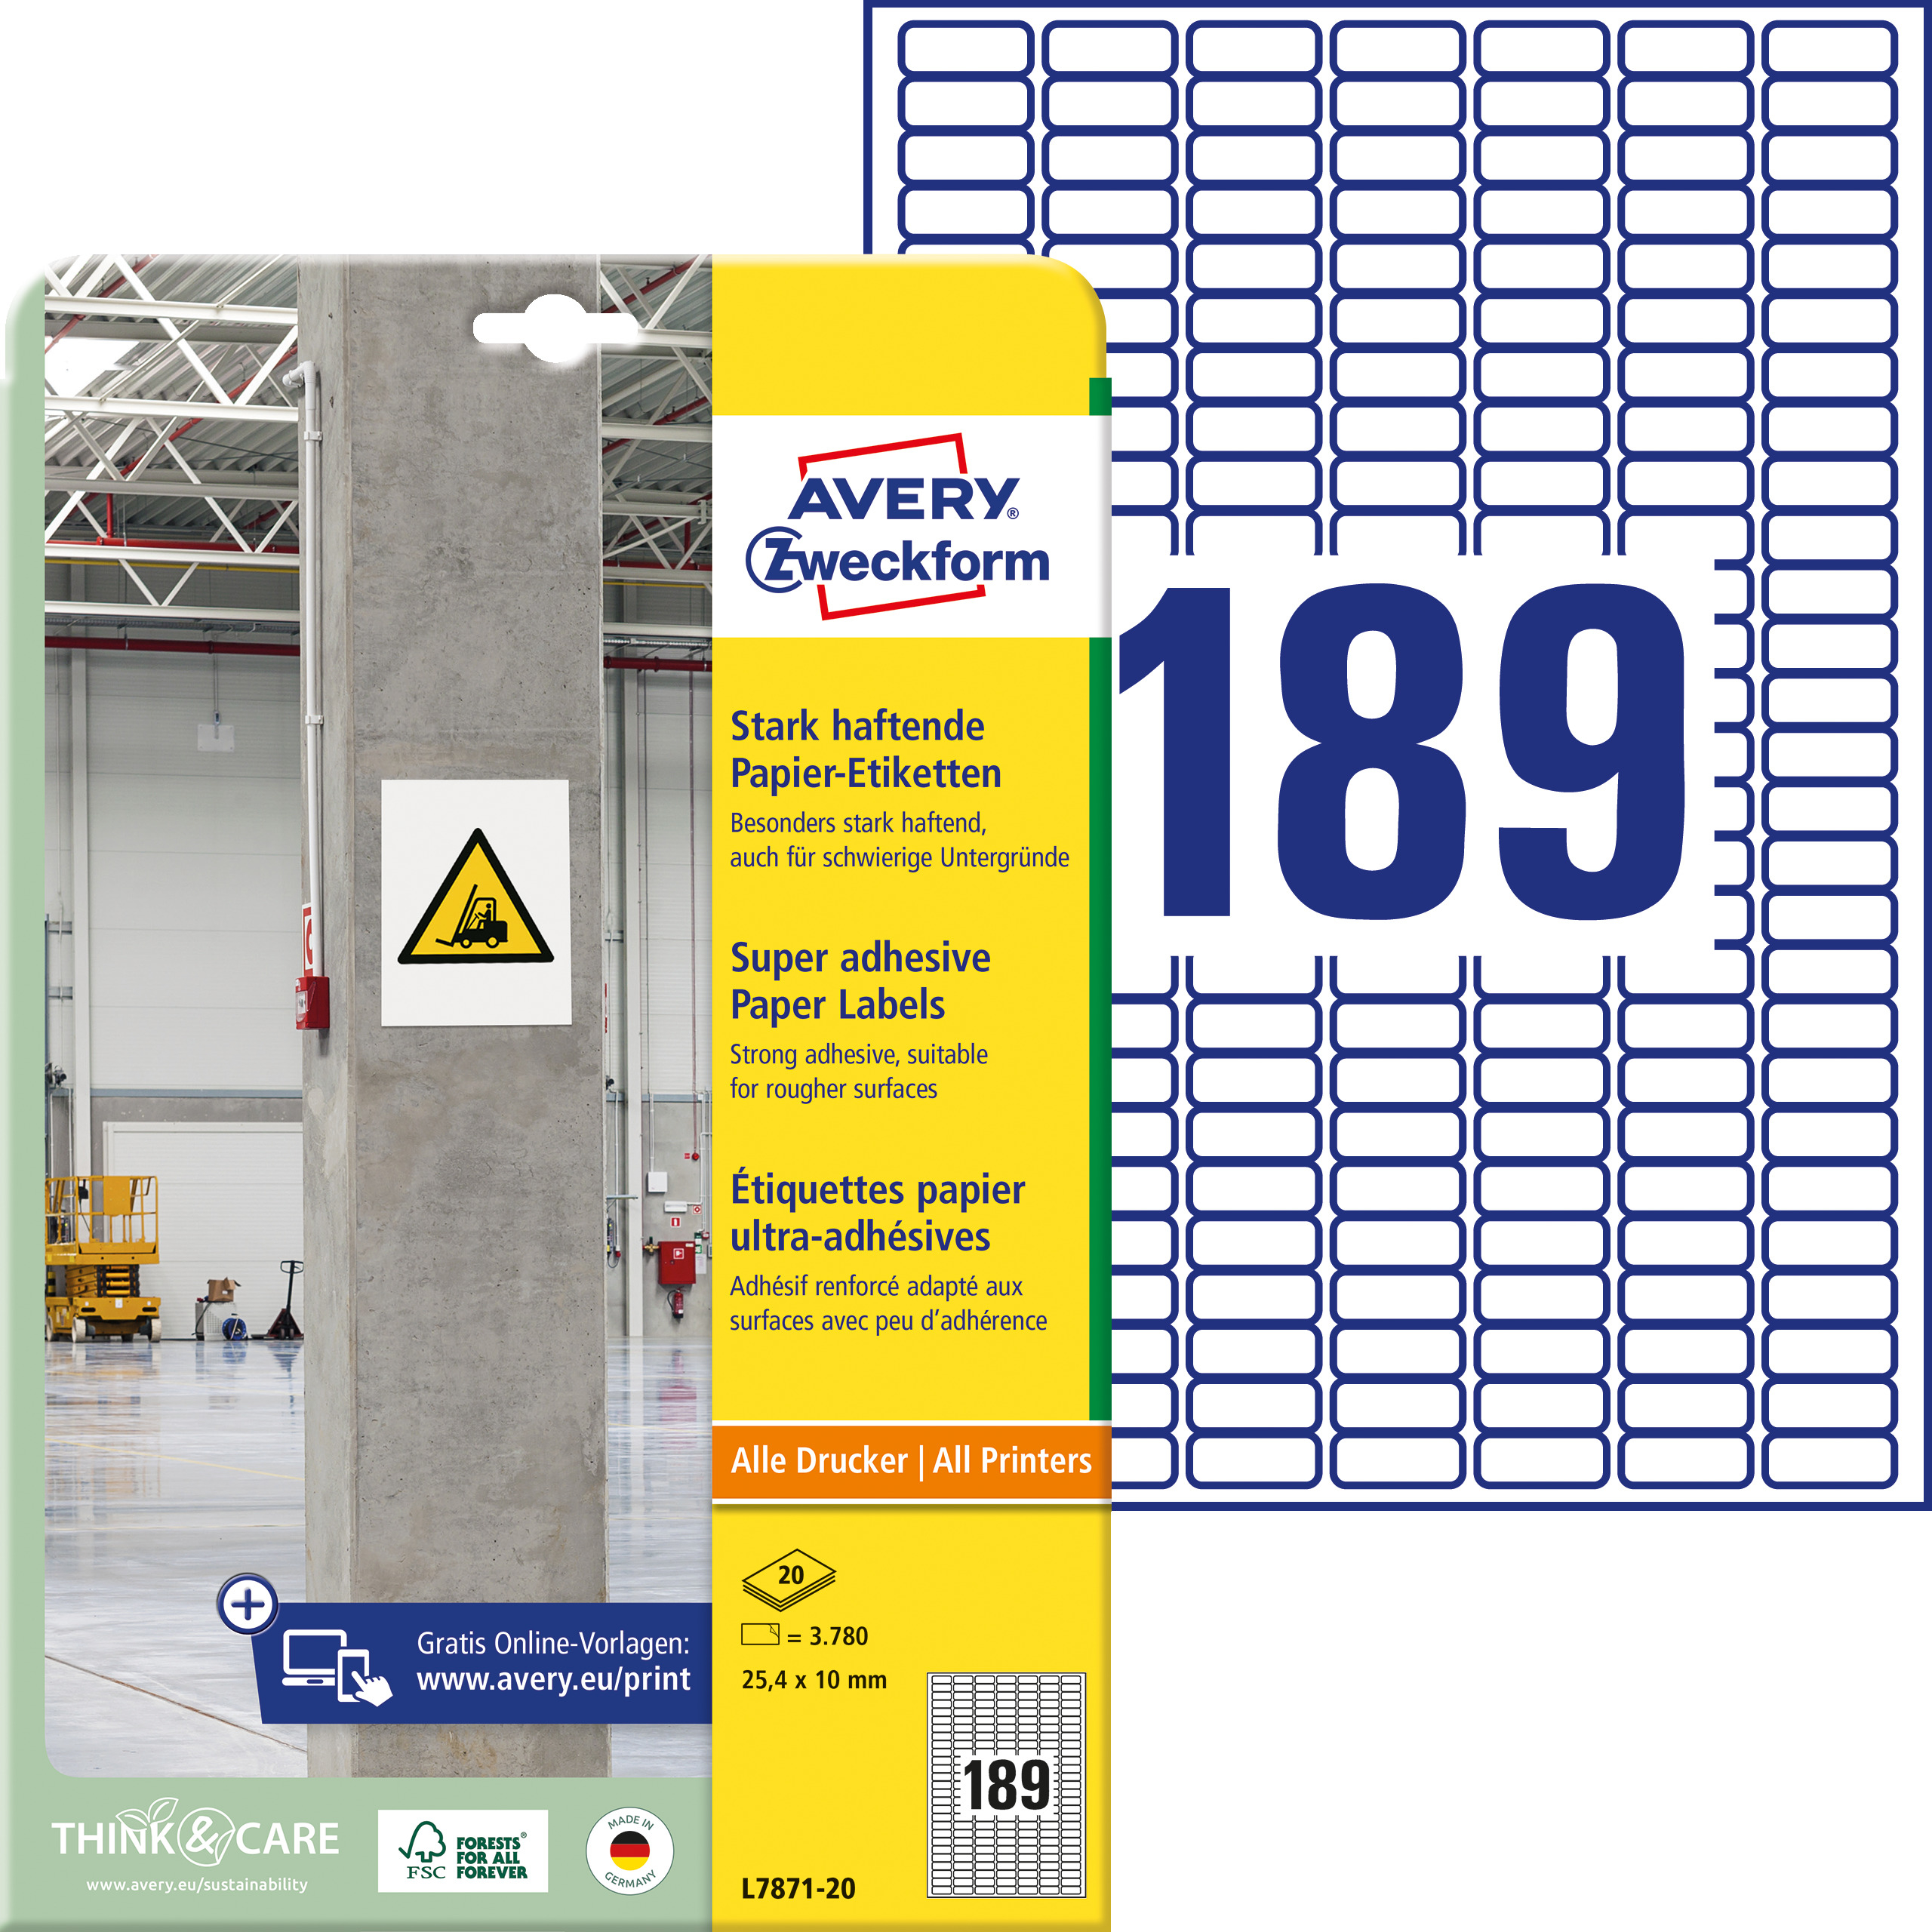 AVERY ZWECKFORM Etiquettes Univ. 25.4x10mm L7871-20 blanc, strong 20 feuilles blanc, strong 20 feuil